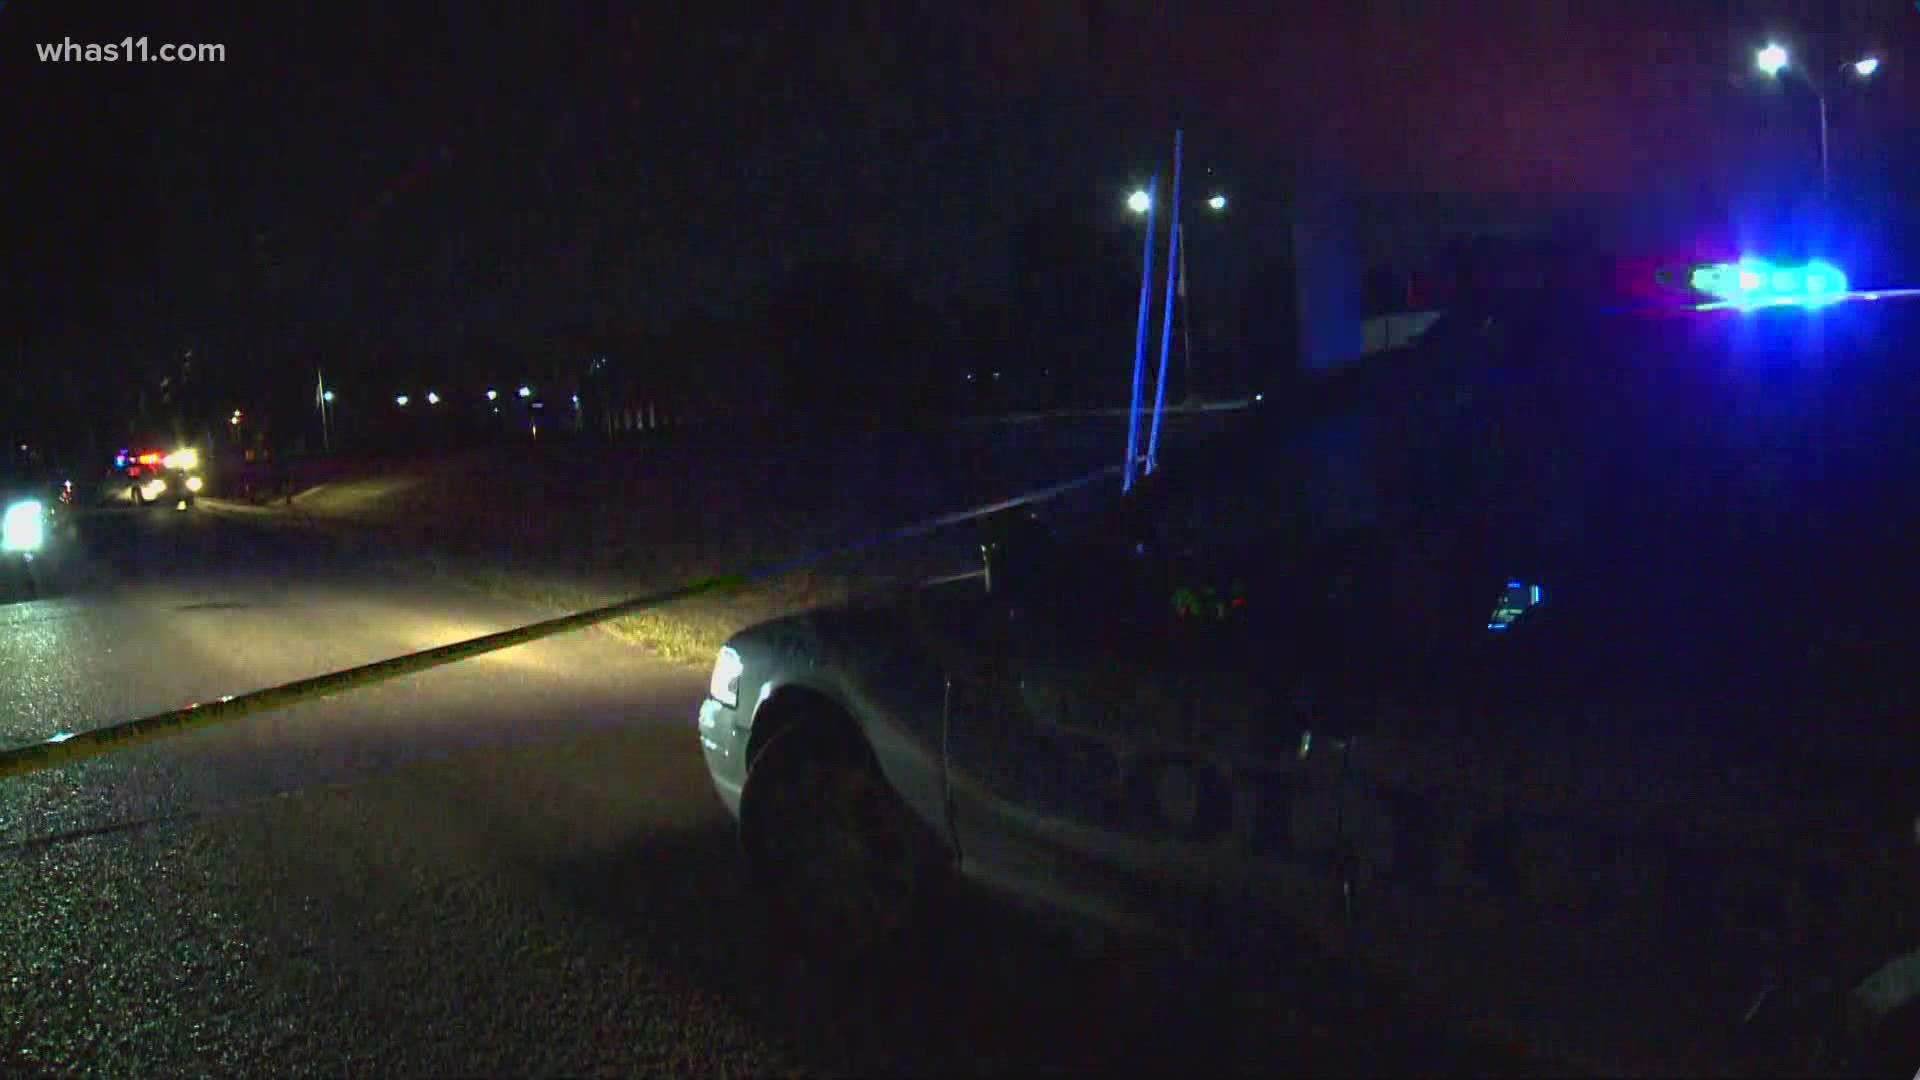 Police said the 5-year-old was shot in the incident on East Indian Trail Tuesday evening.